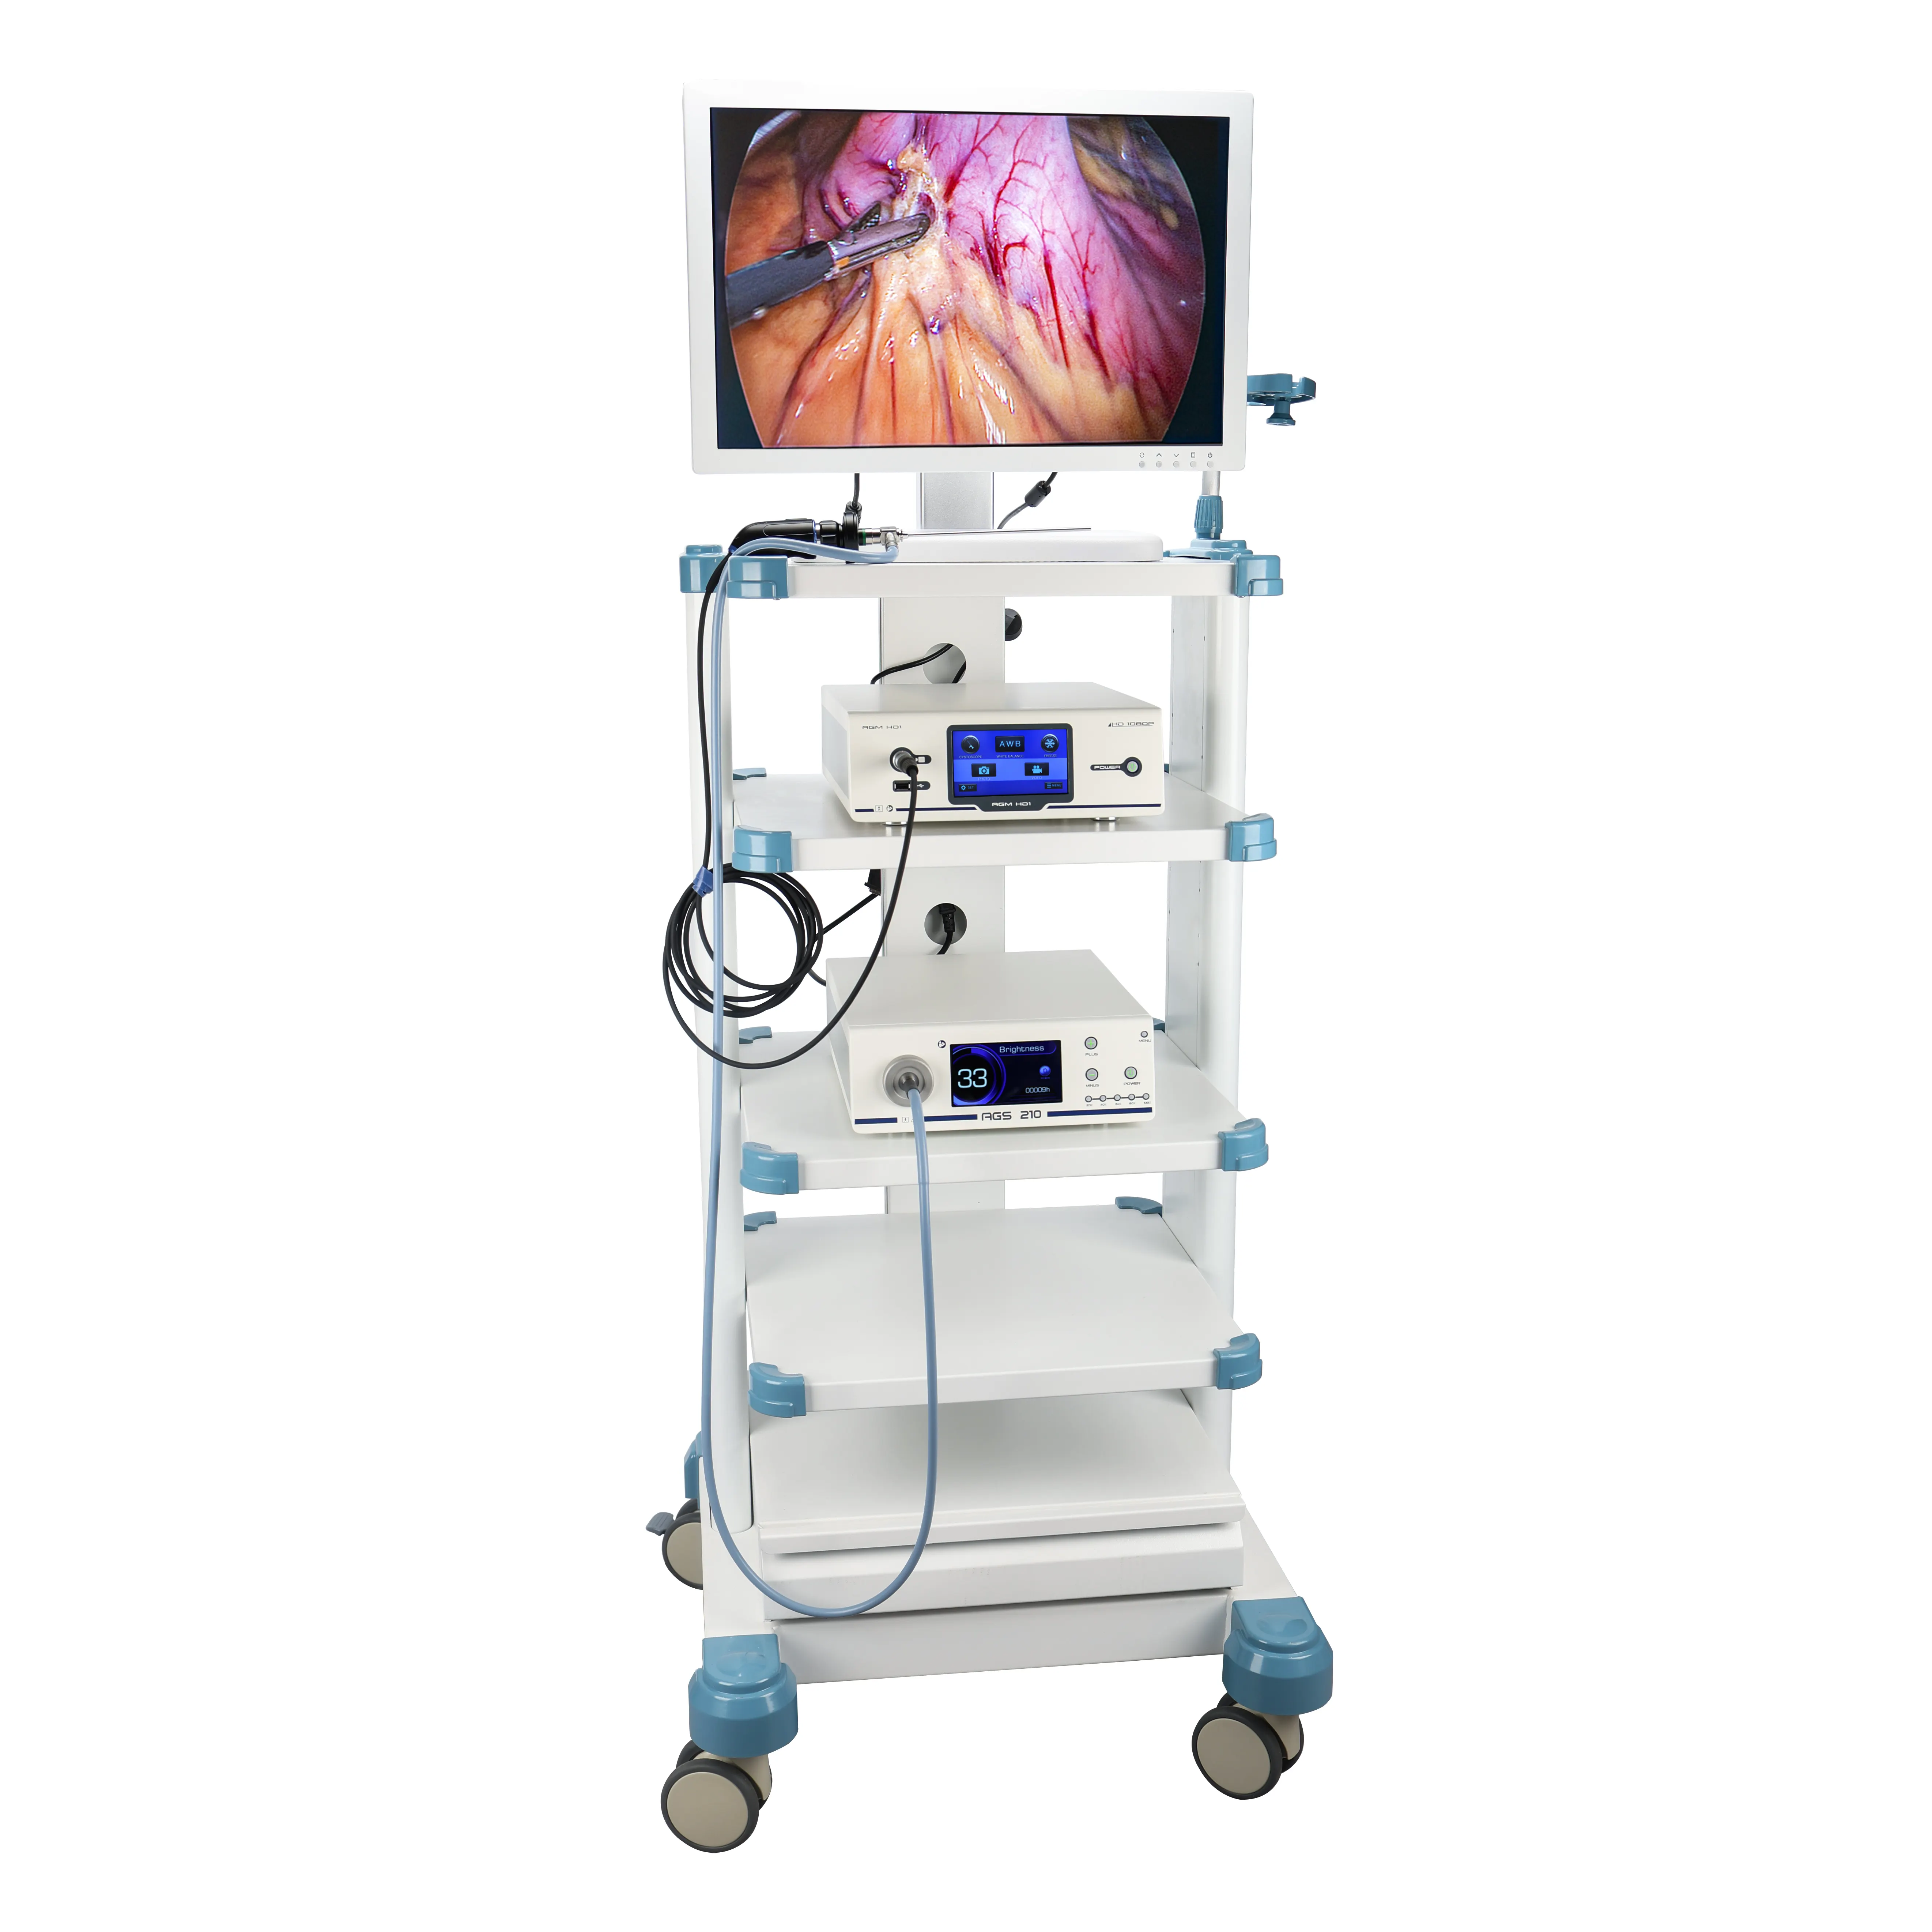 Factory Price Full HD Laparoscopy Tower of Complete Set with Laparoscopic Instruments&Devices, endoscope camera system